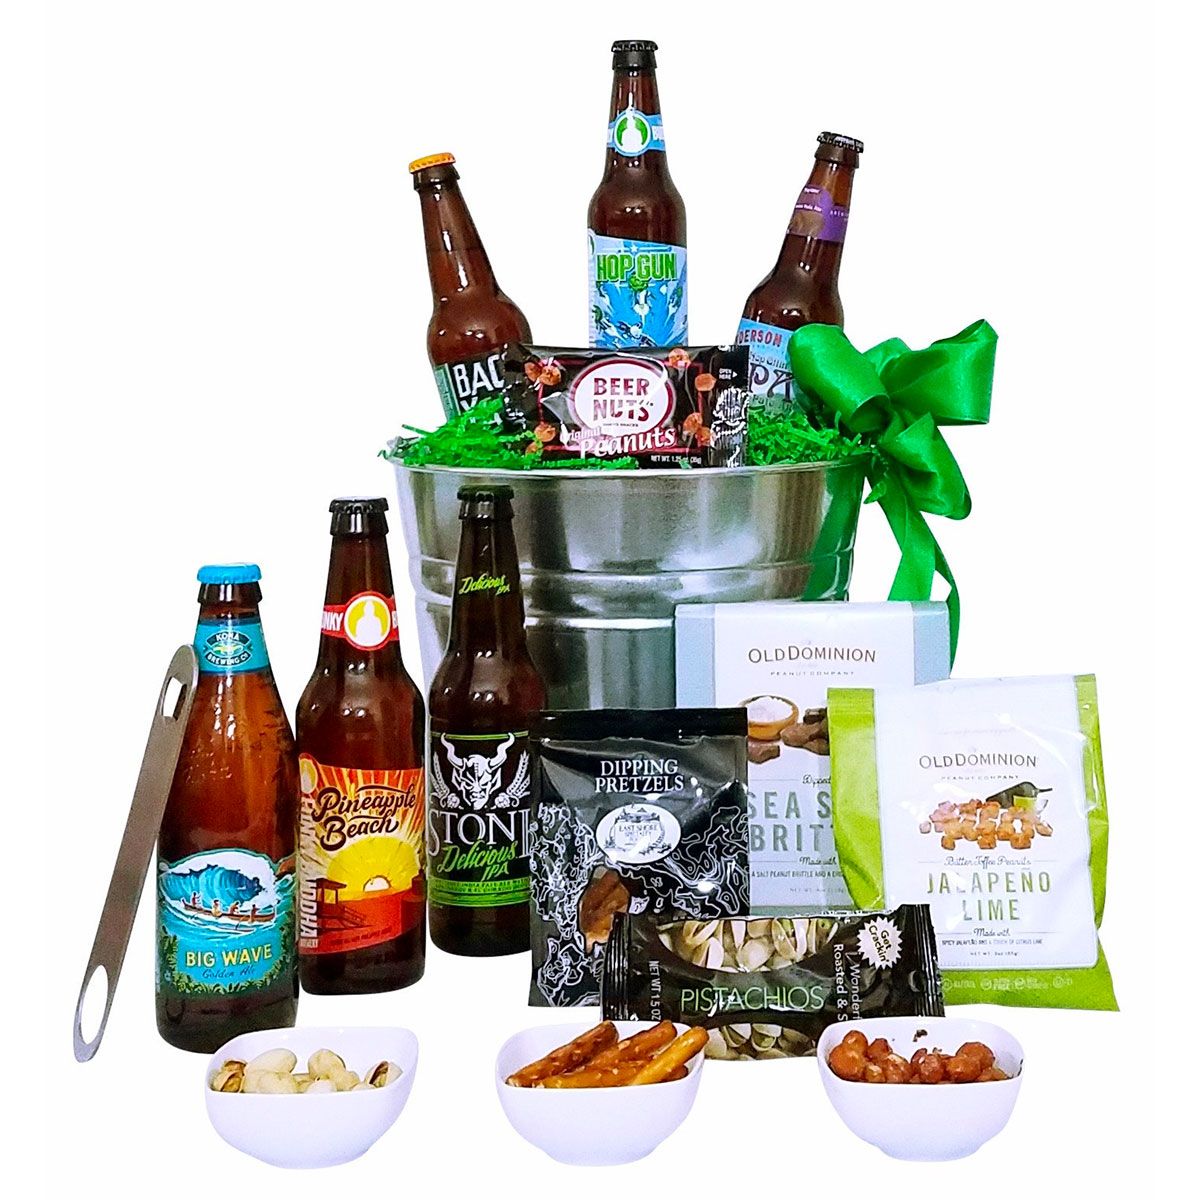 Microbrew Beer Bucket Gift Basket - 6 Beers  Gift baskets for men,  Birthday gifts for boyfriend, Diy gifts for him